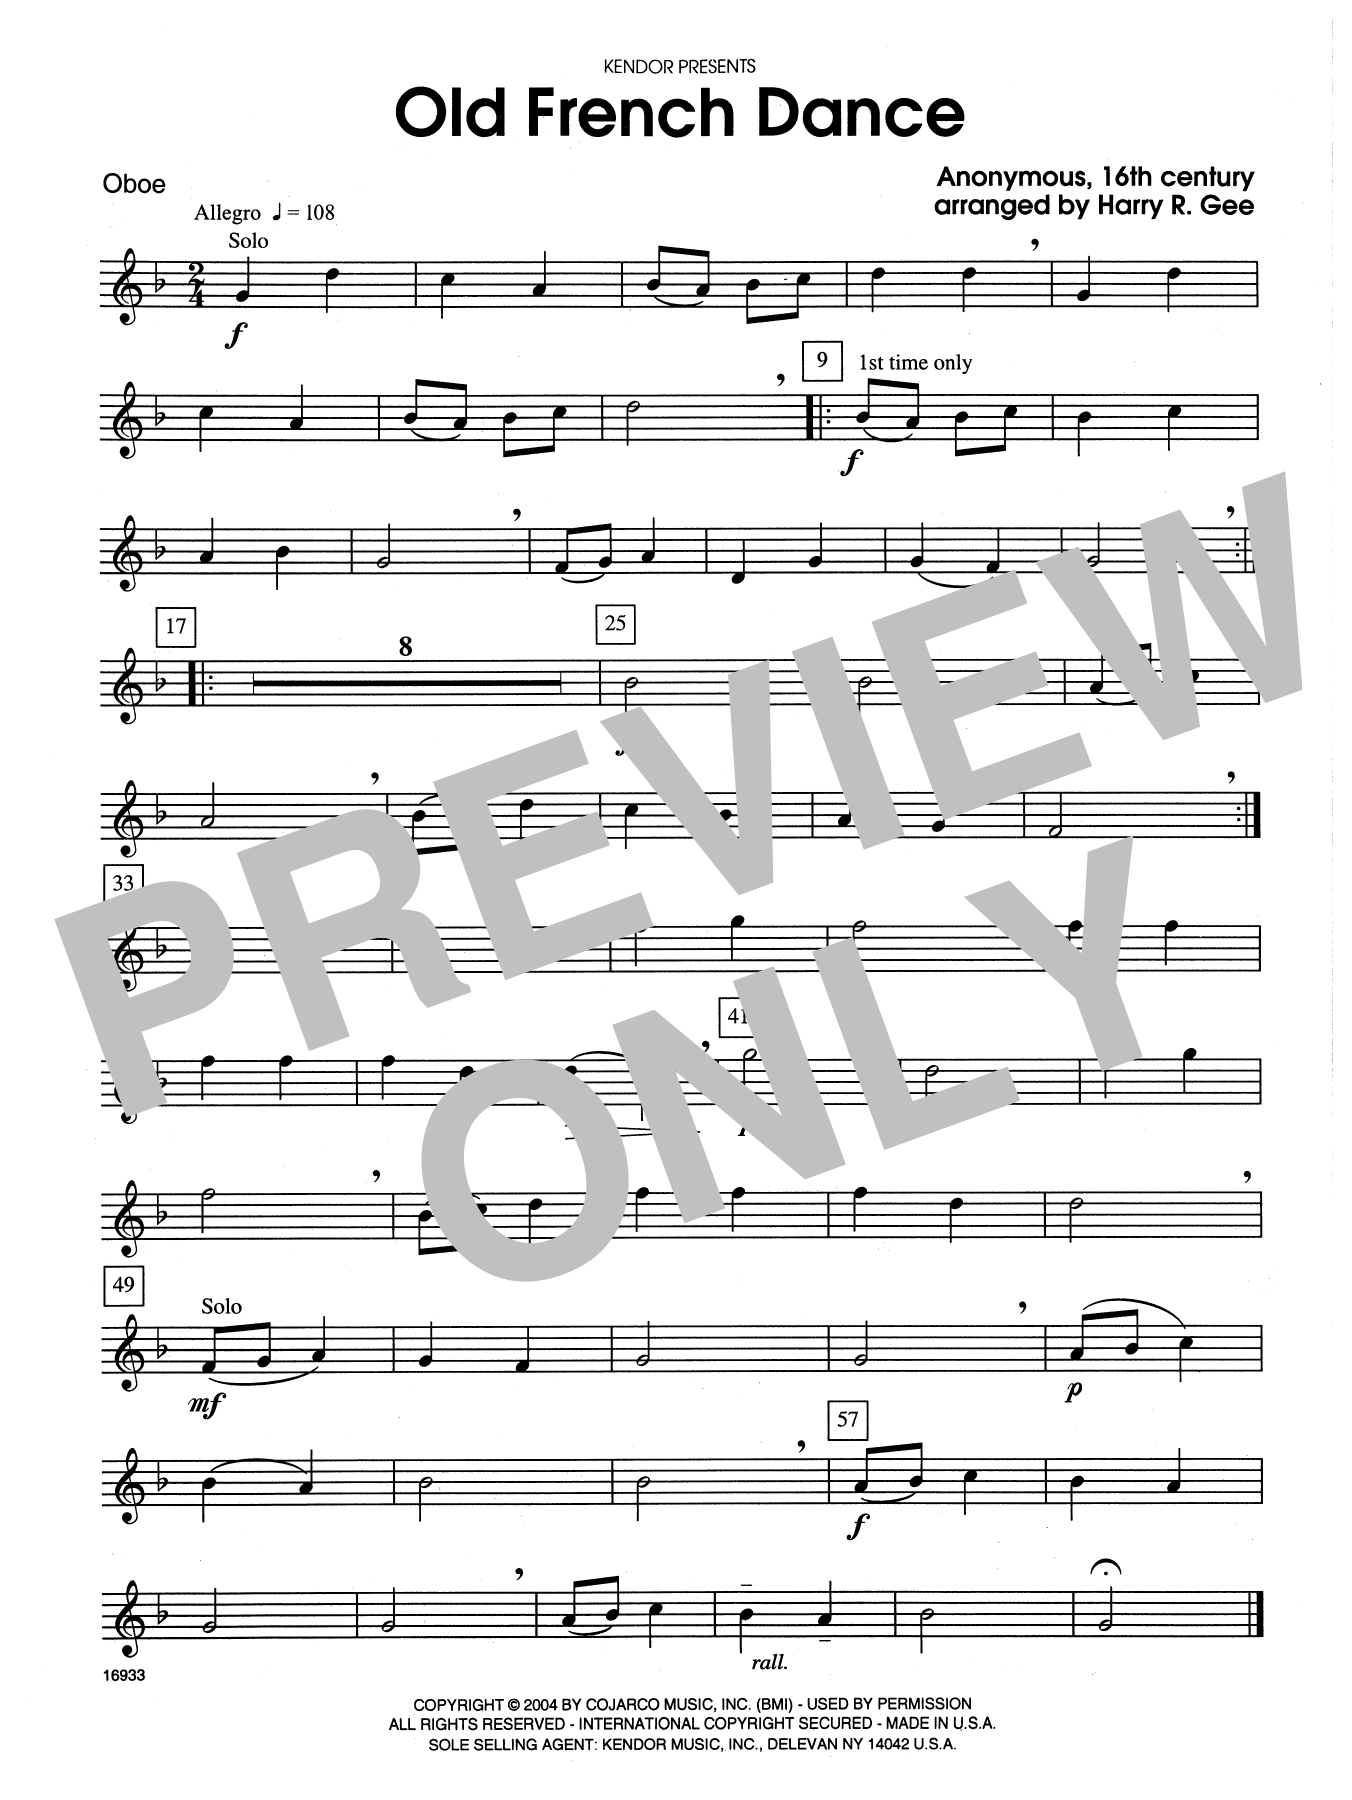 Download Harry R. Gee Old French Dance - Oboe Sheet Music